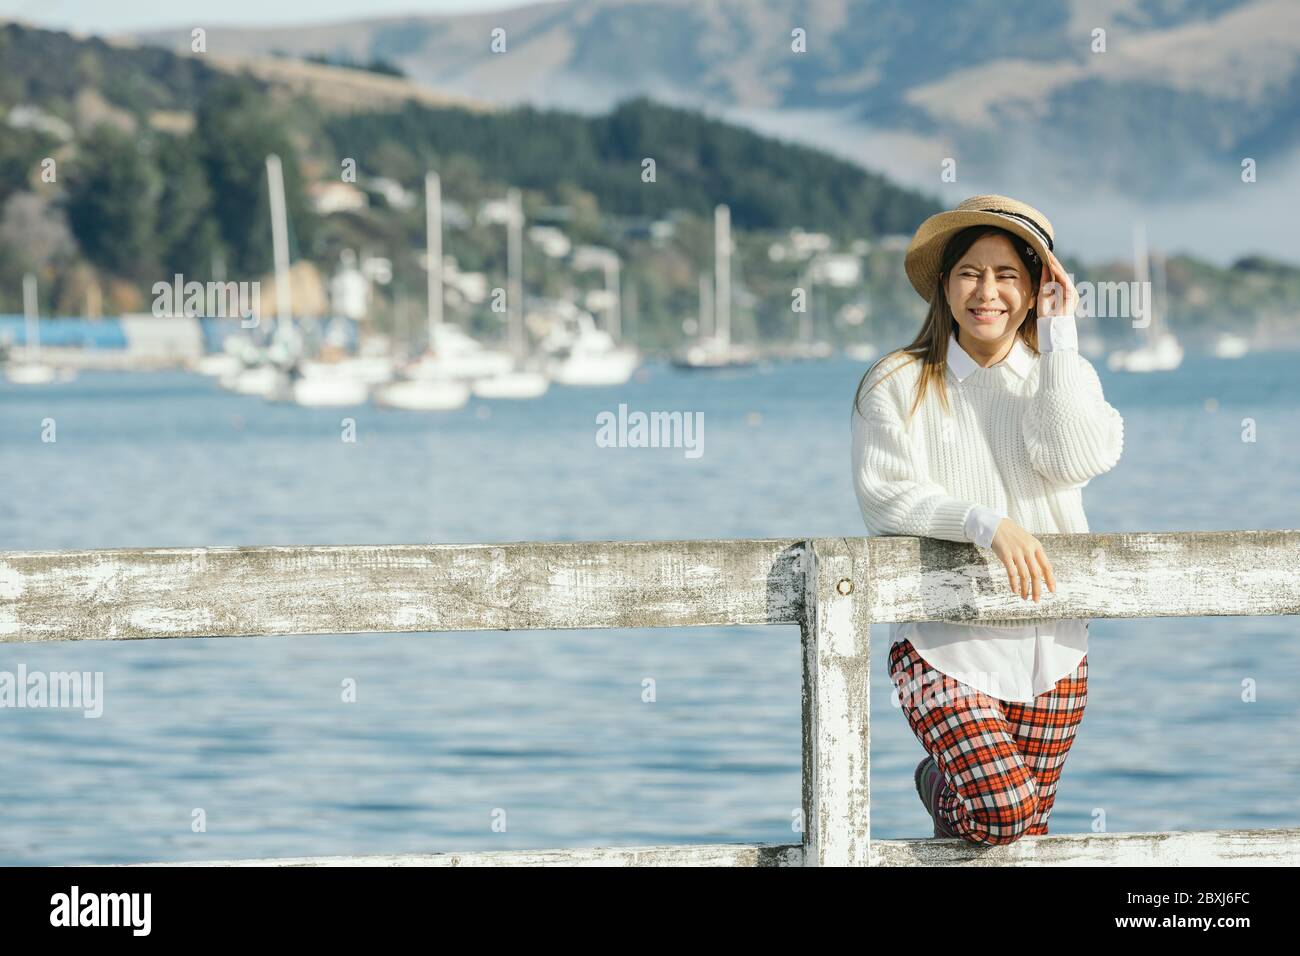 Beautyful asian woman resting is looks at the sea bay with houses and boats on a sunny day at Childrens bay, Akaroa, Canterbury, New Zealand. Relaxing Stock Photo